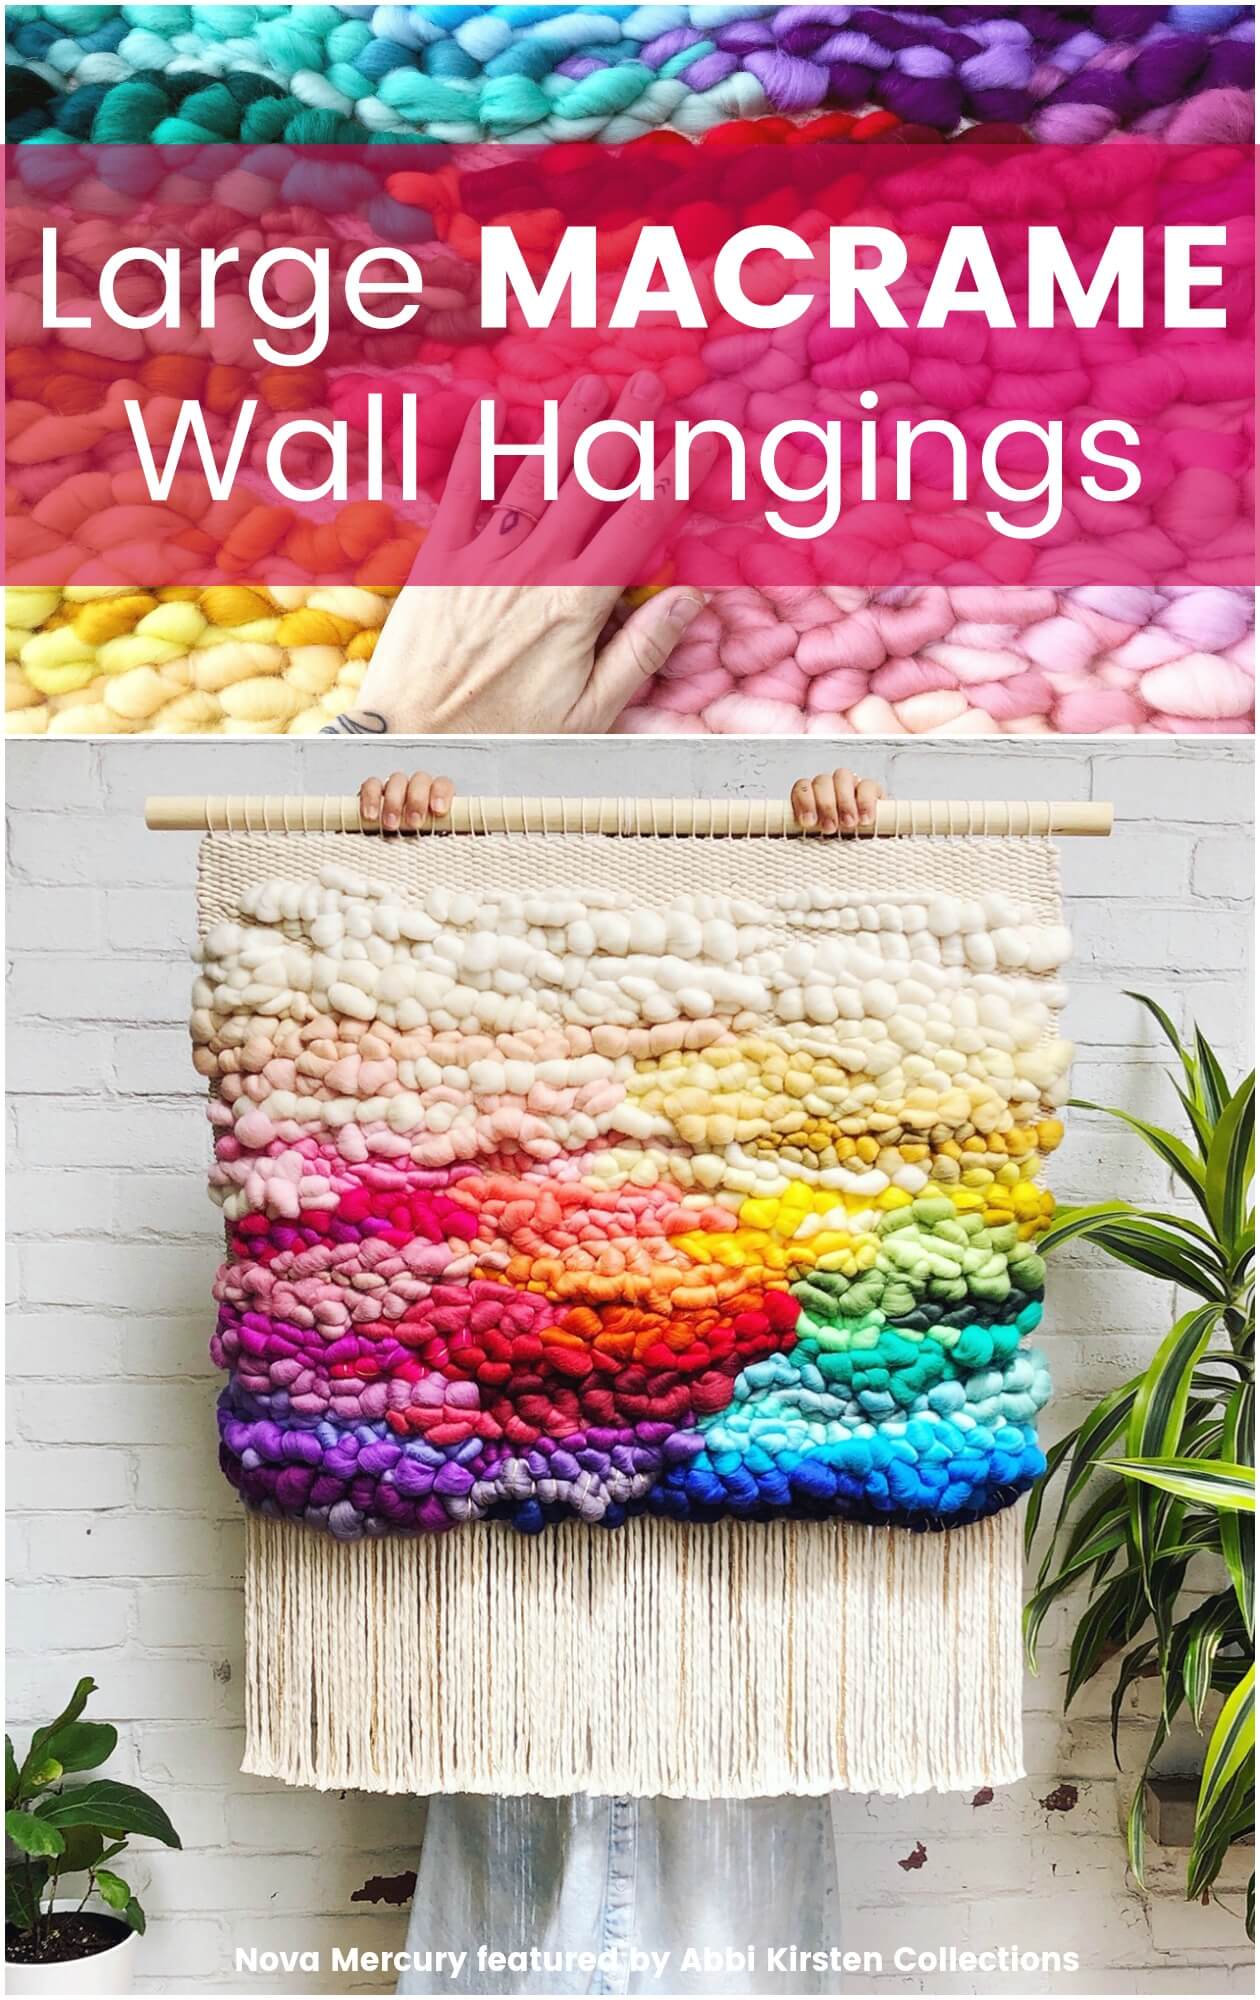 A woman holds up a large macrame wall hanging made with many colors of intricately woven fabric. Every color of the rainbow is woven between strands of tan and cream macrame threads.